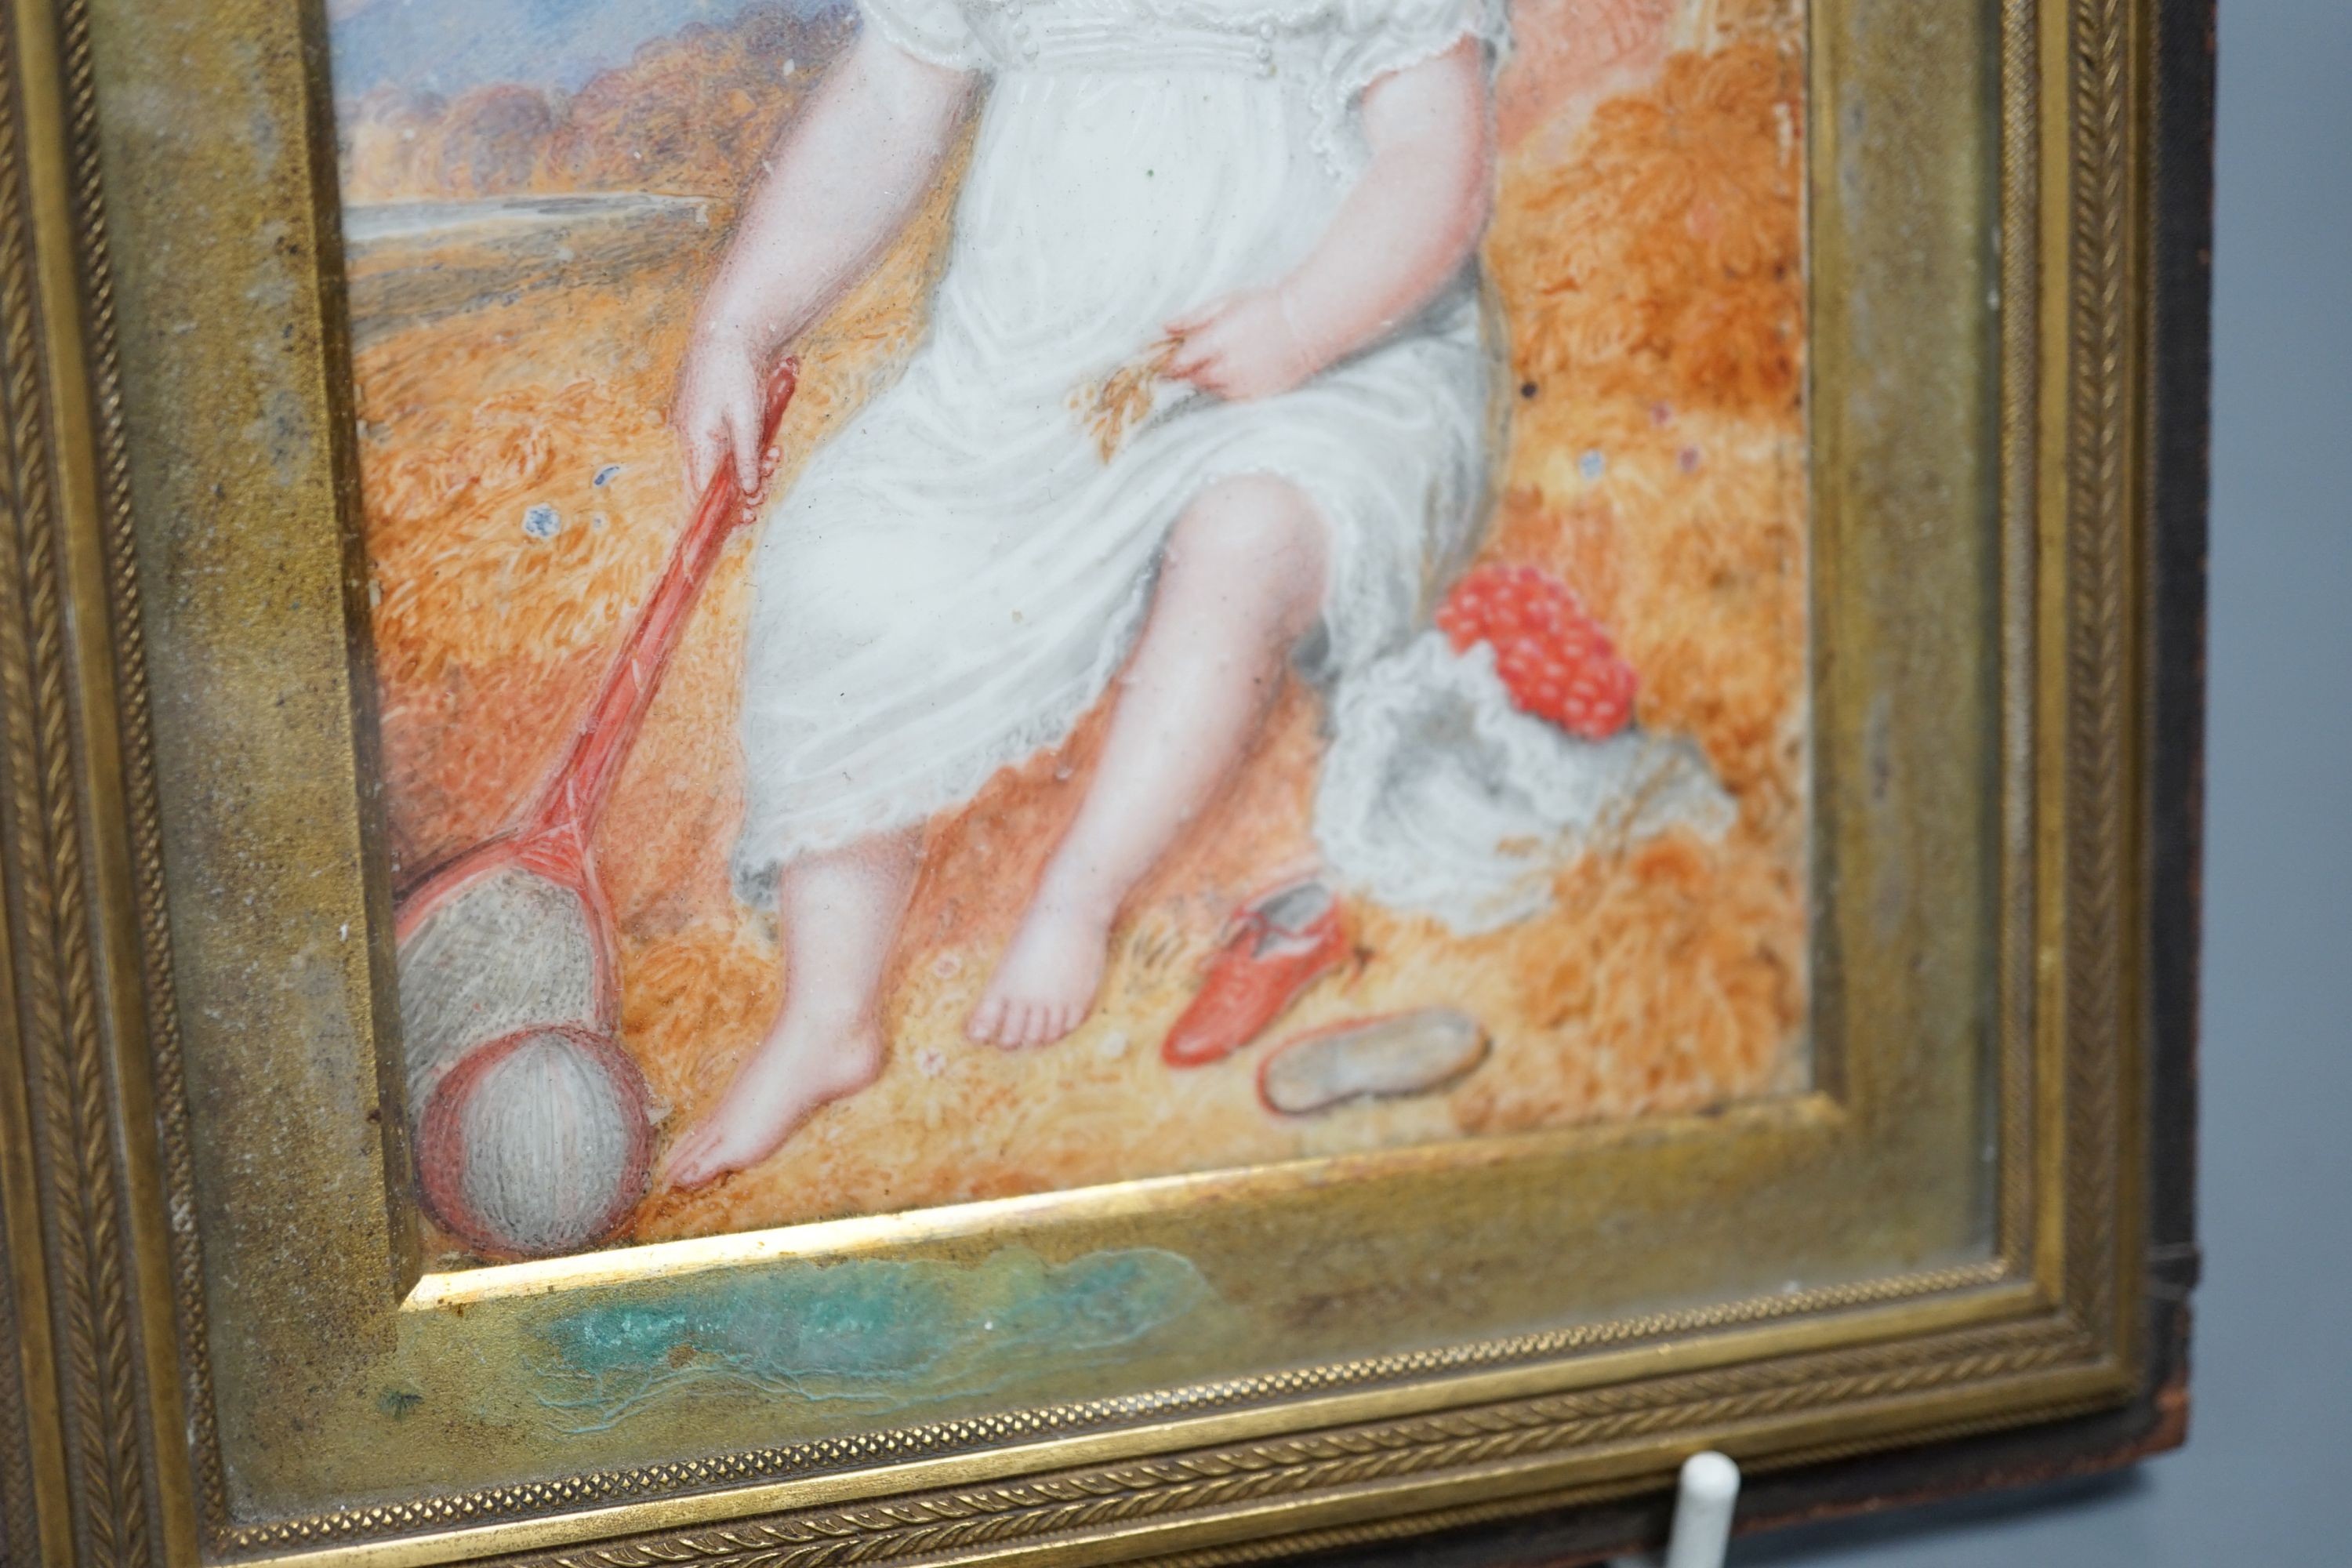 A 19th century portrait miniature on ivory of an infant, with racket and ball, 10 cms wide x 14 cms high.